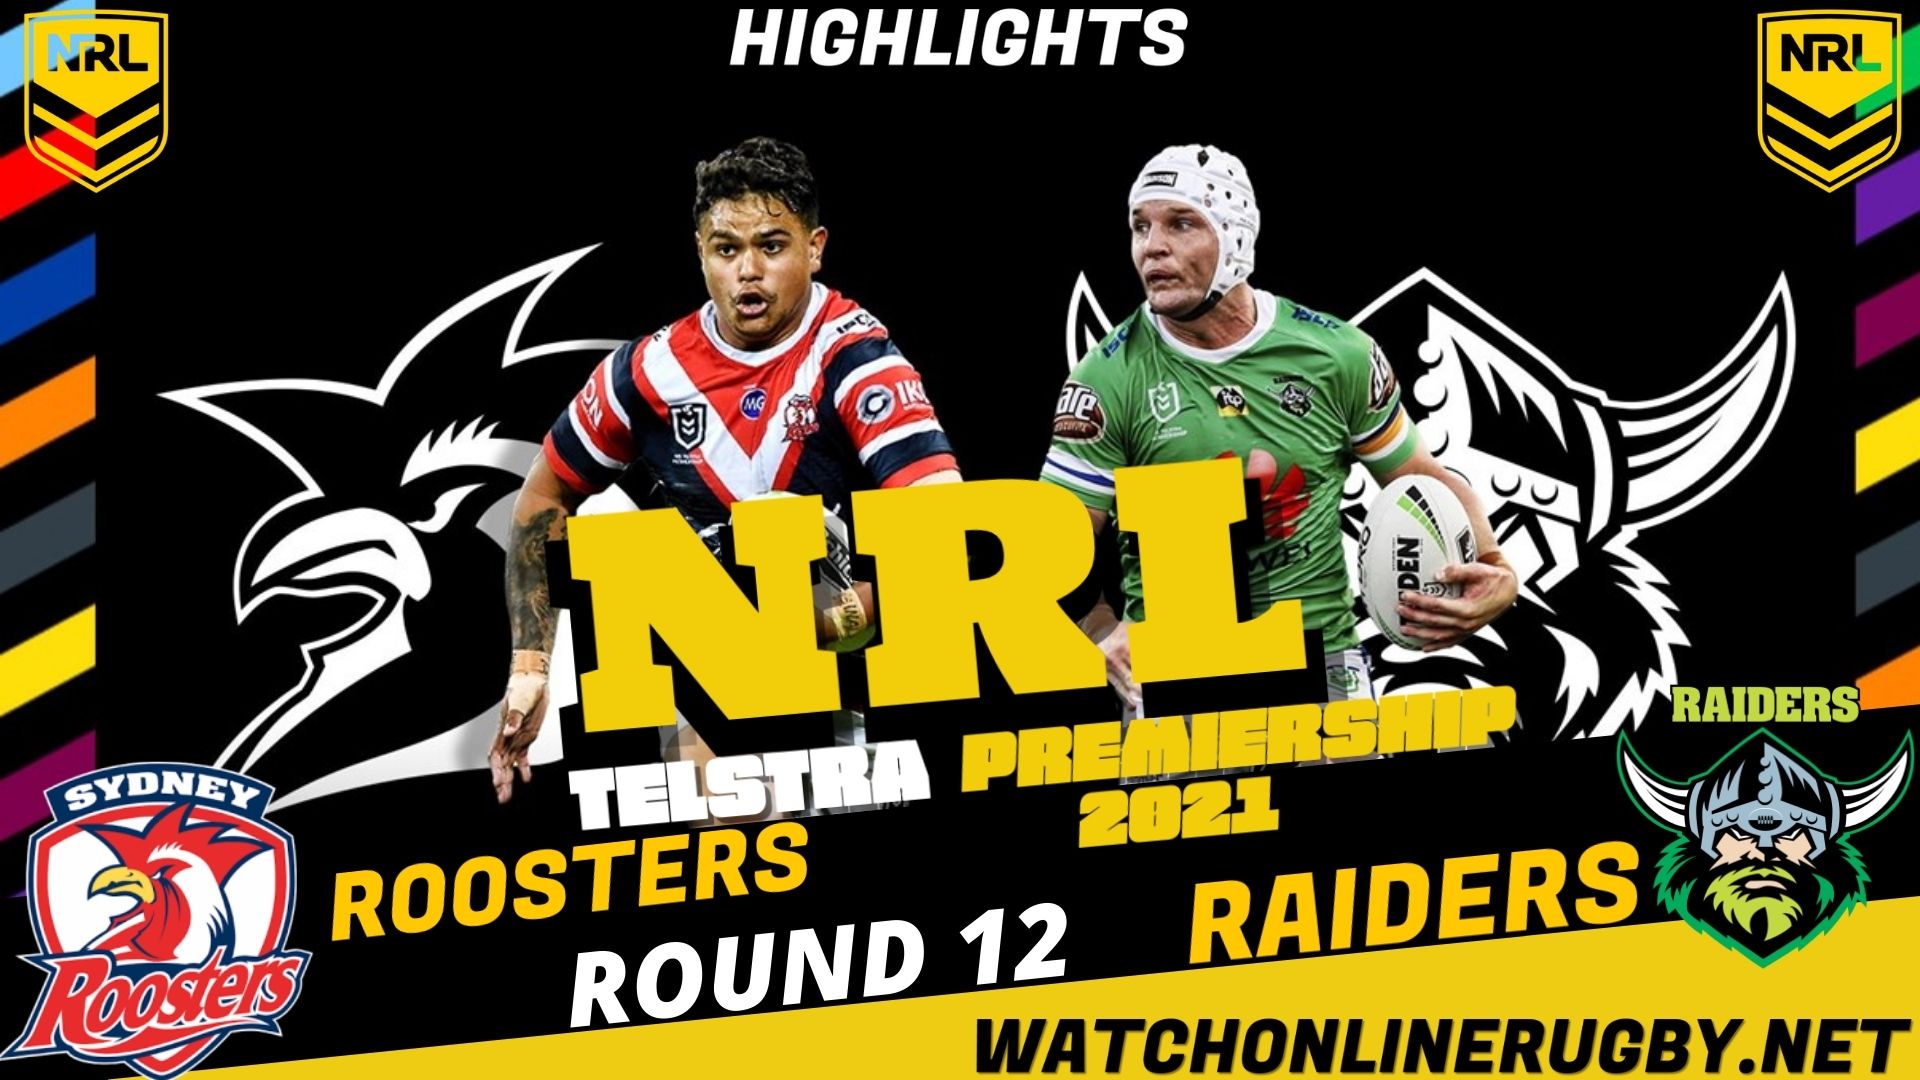 Roosters Vs Raiders Highlights RD 12 NRL Rugby